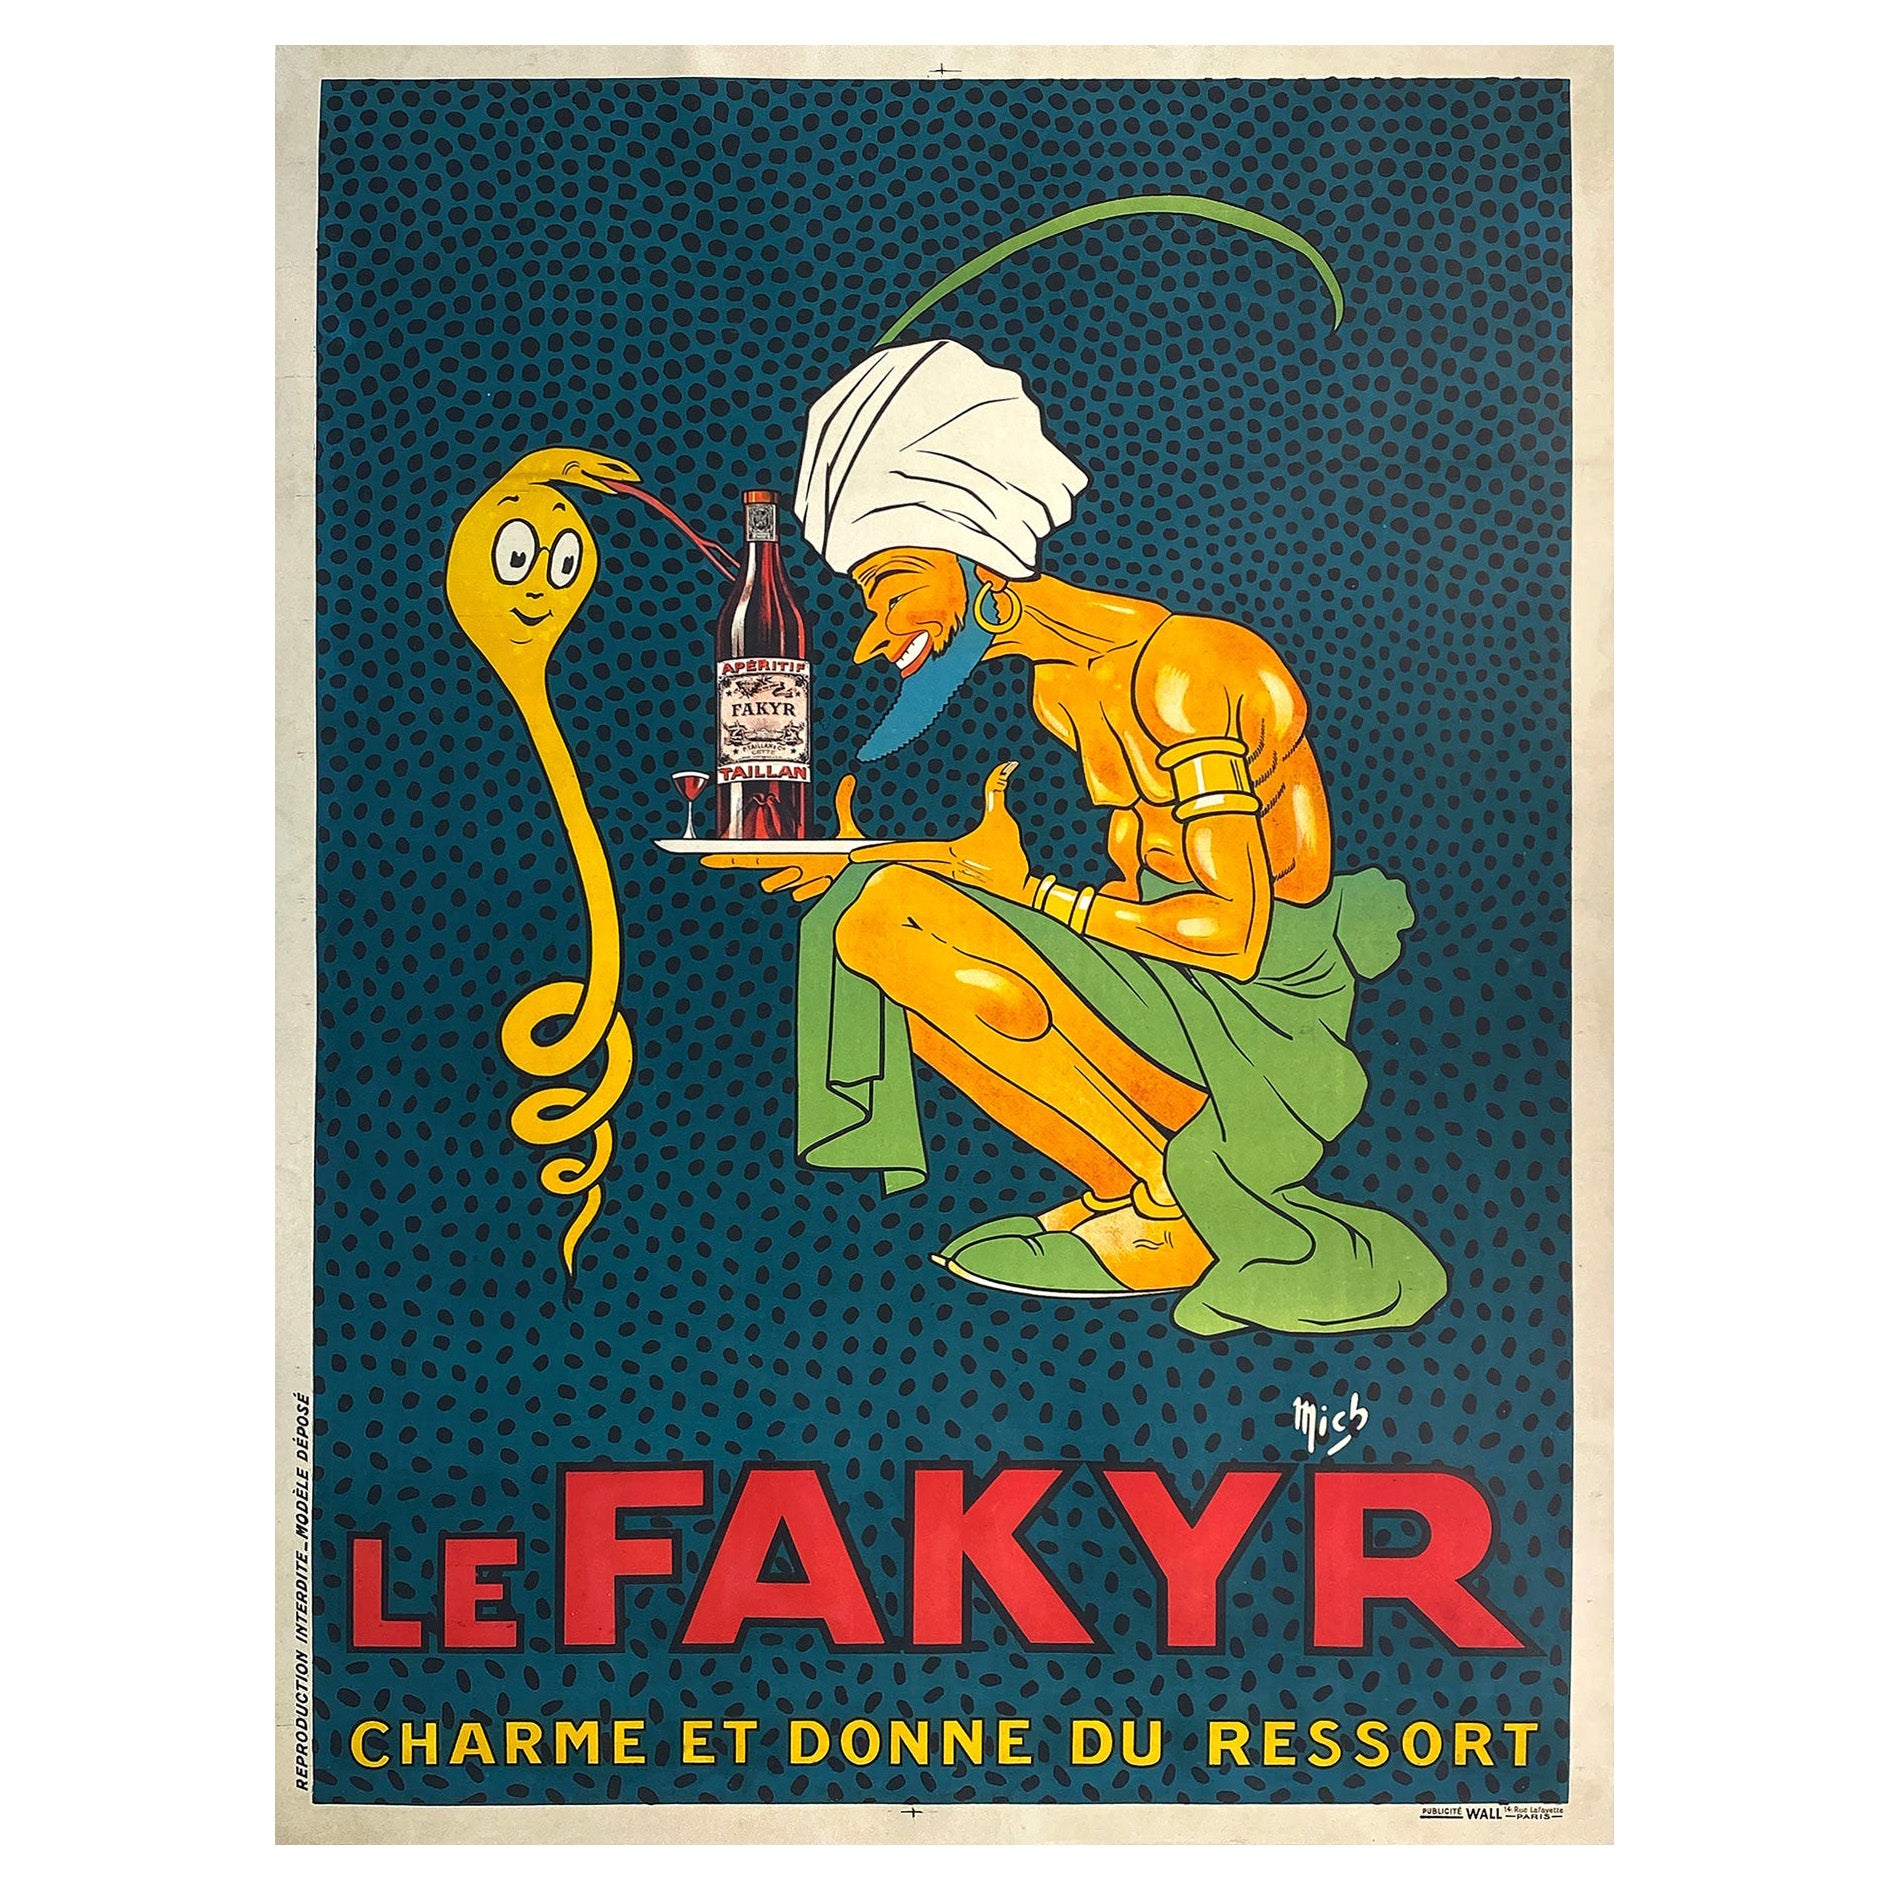 Le Fakyr, C1920 Vintage French Alcohol Advertising Poster, Michel Liebeaux